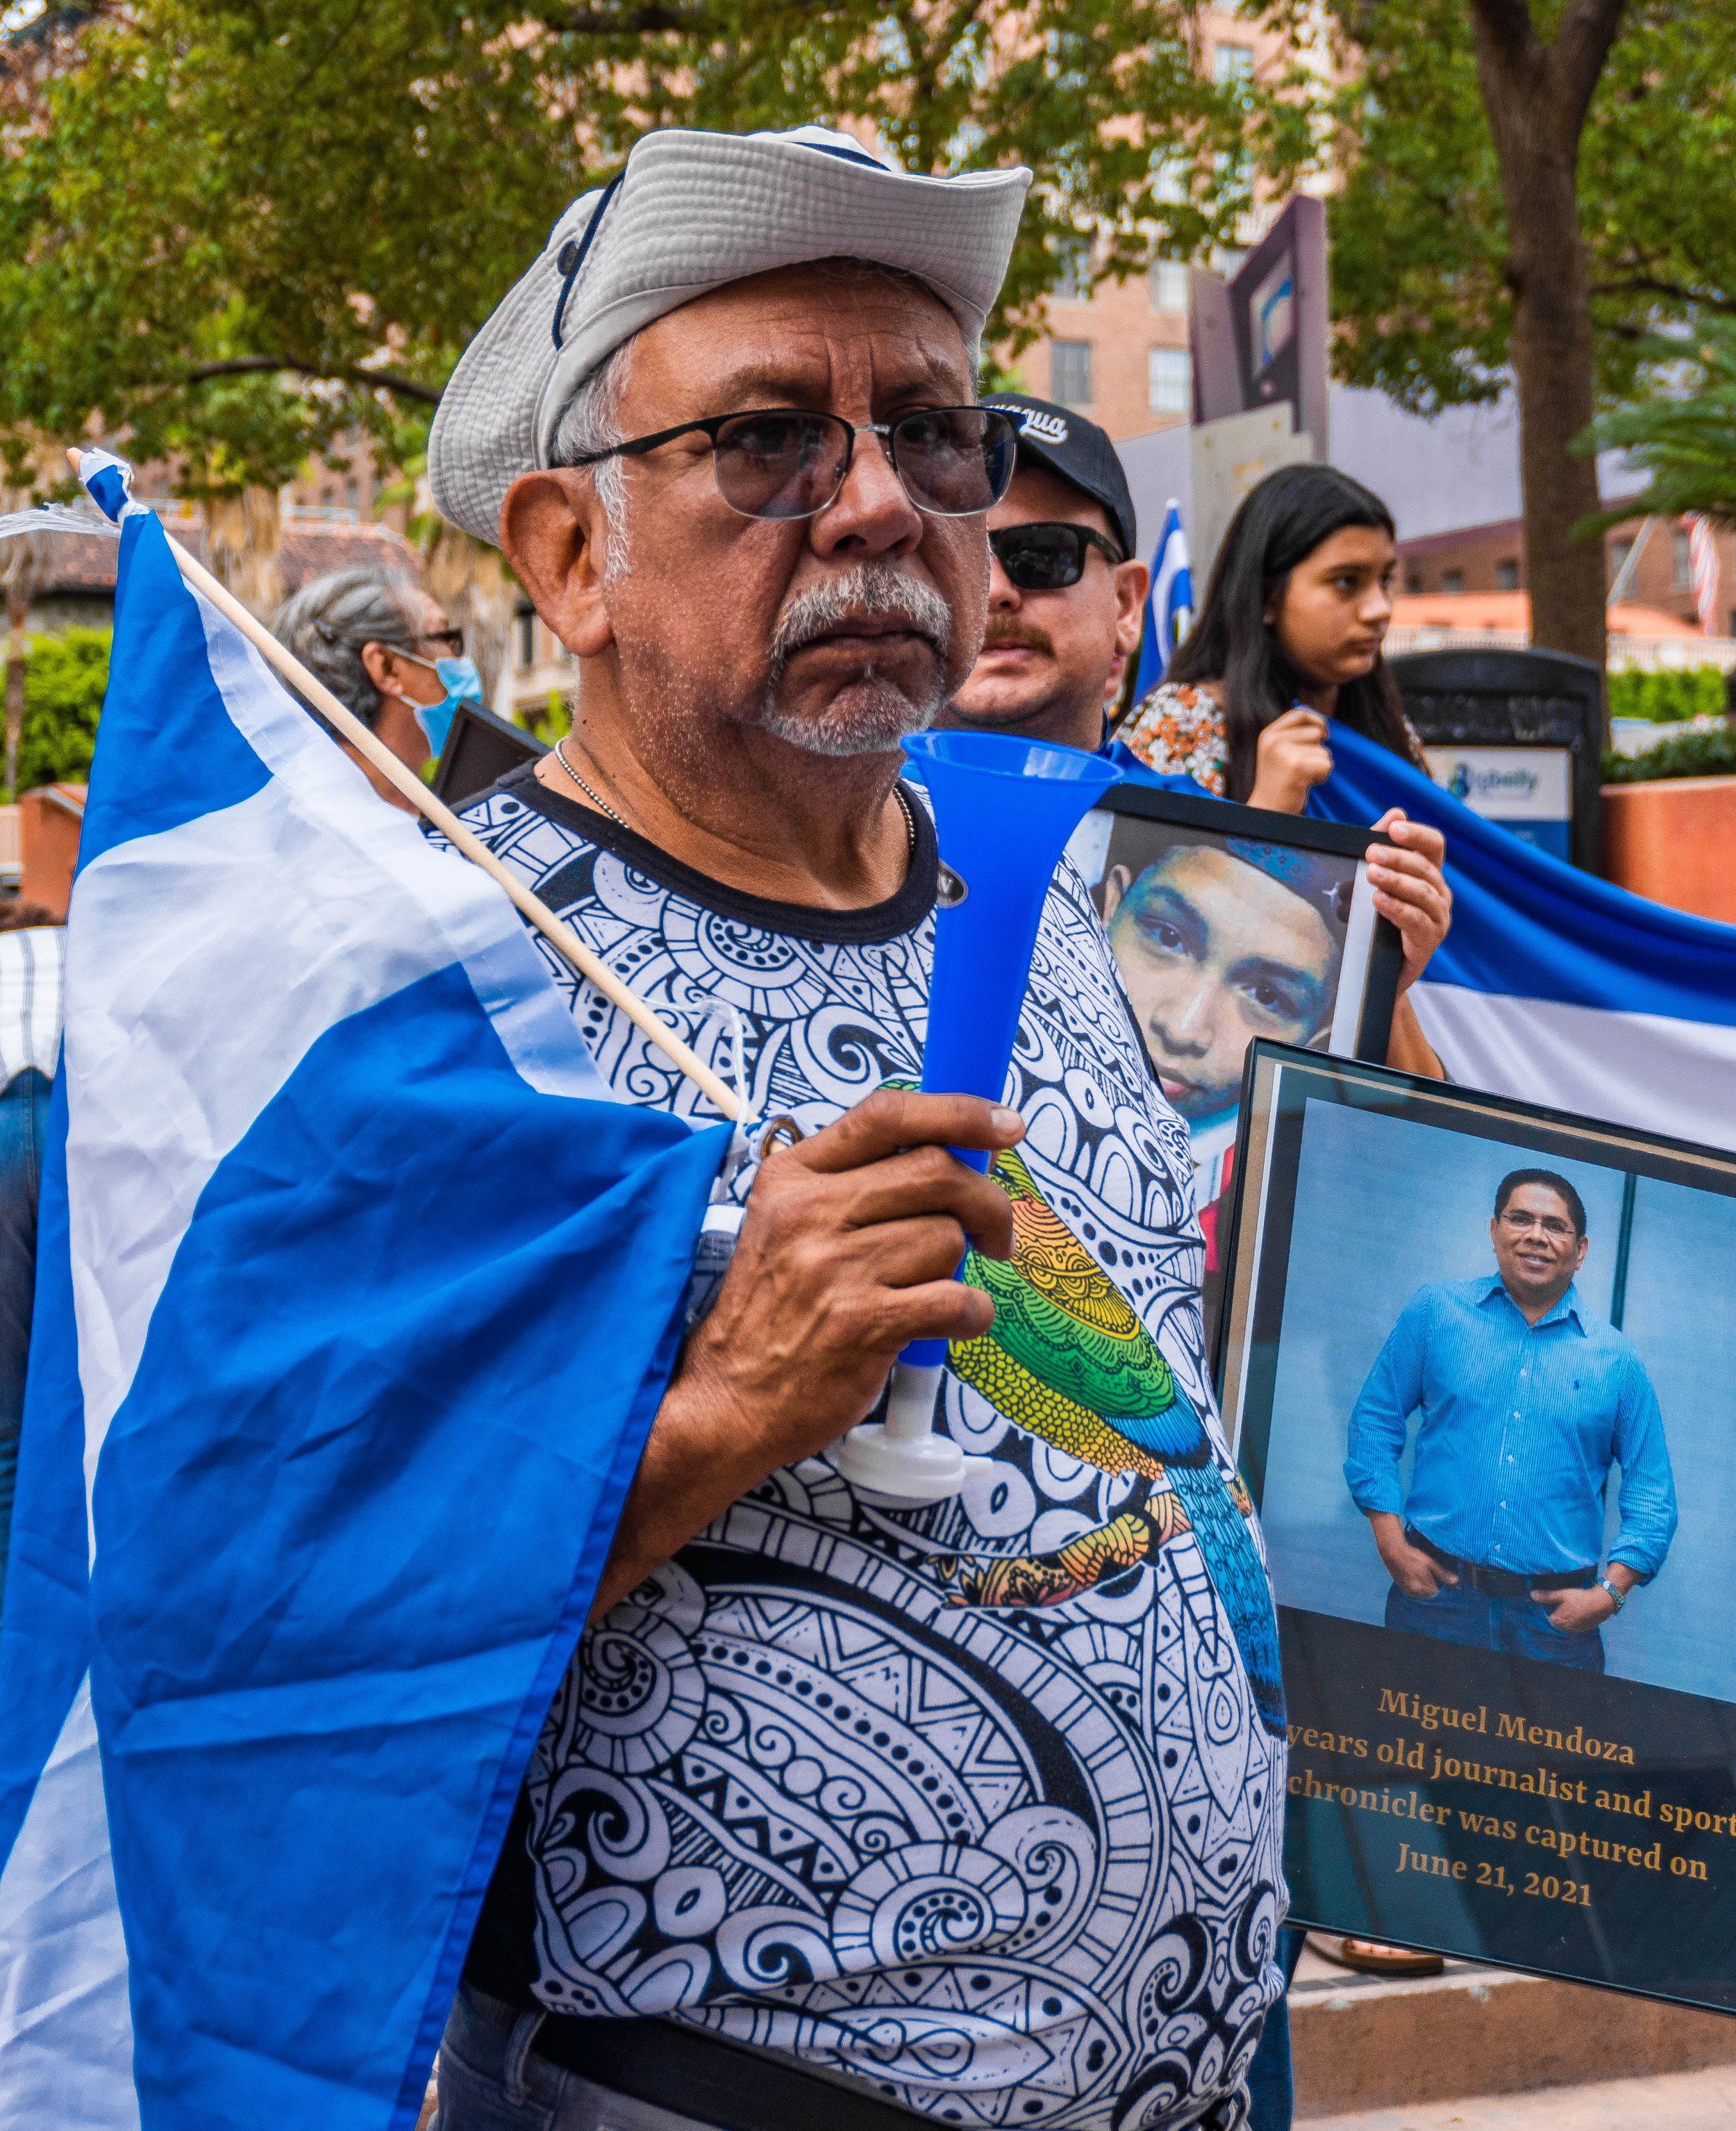  "I used to be a pro baseball player and he was a sports writer," says Alfonso Perez, as he holds a picture of journalist Miguel Mendoza. Mendoza has been captured by the Nicaraguan government since June 21, 2021. Downtown Los Angeles, CA. (Ee Lin Ts